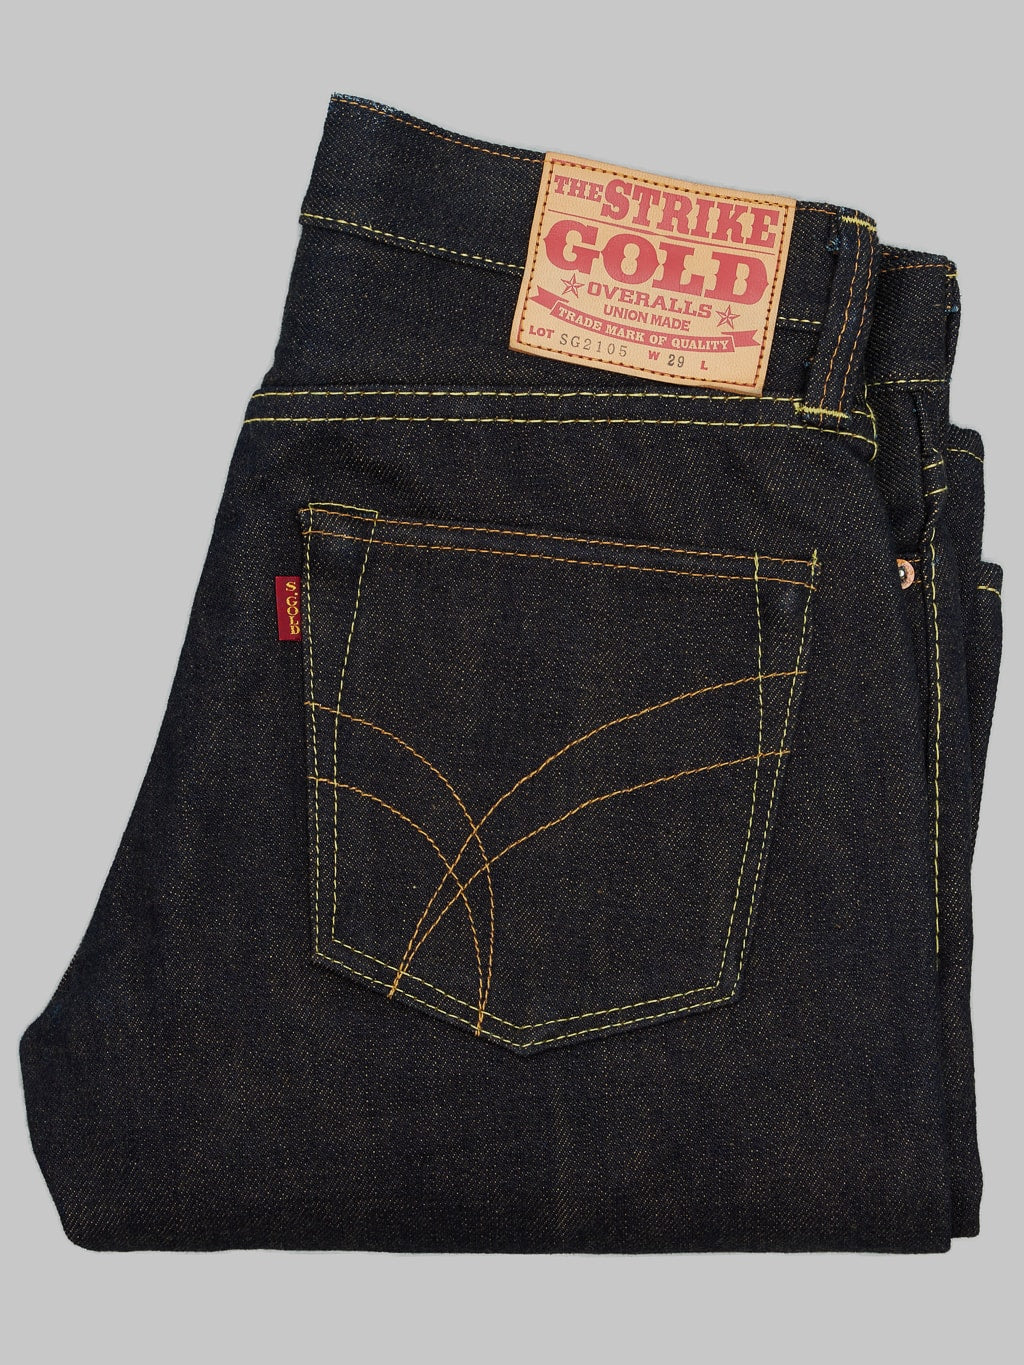 The Strike Gold Brown Weft Slim Jeans japan made